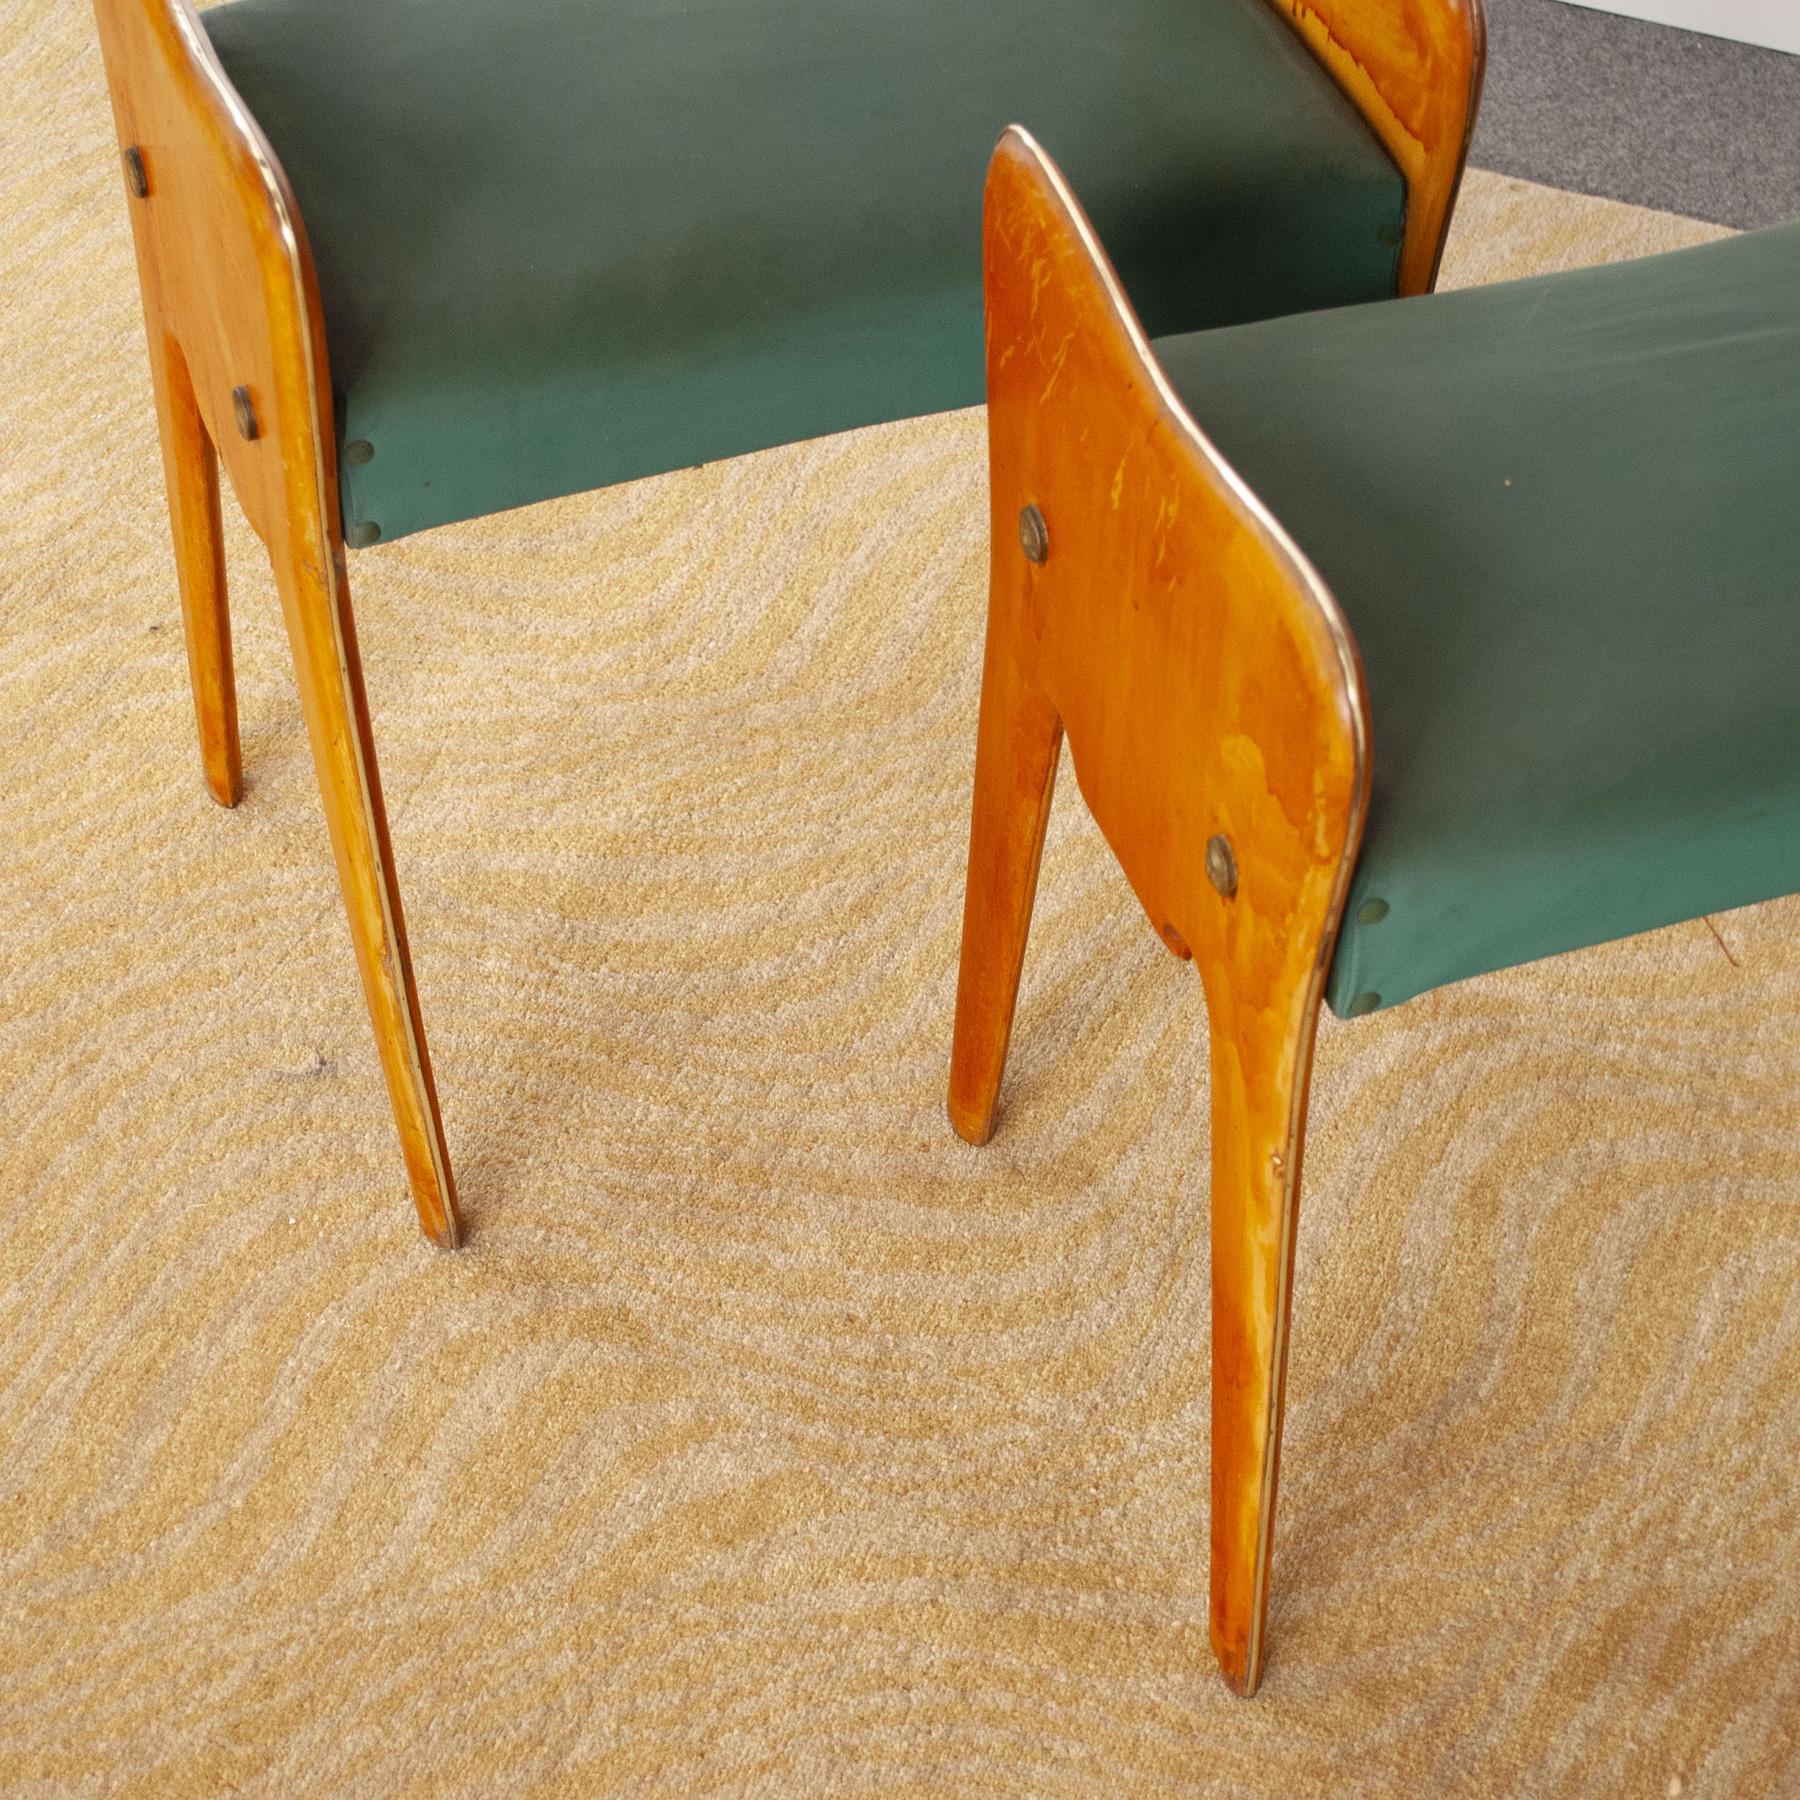 Italian Mid-Century Pair of Wooden Benches from the 1950s For Sale 2